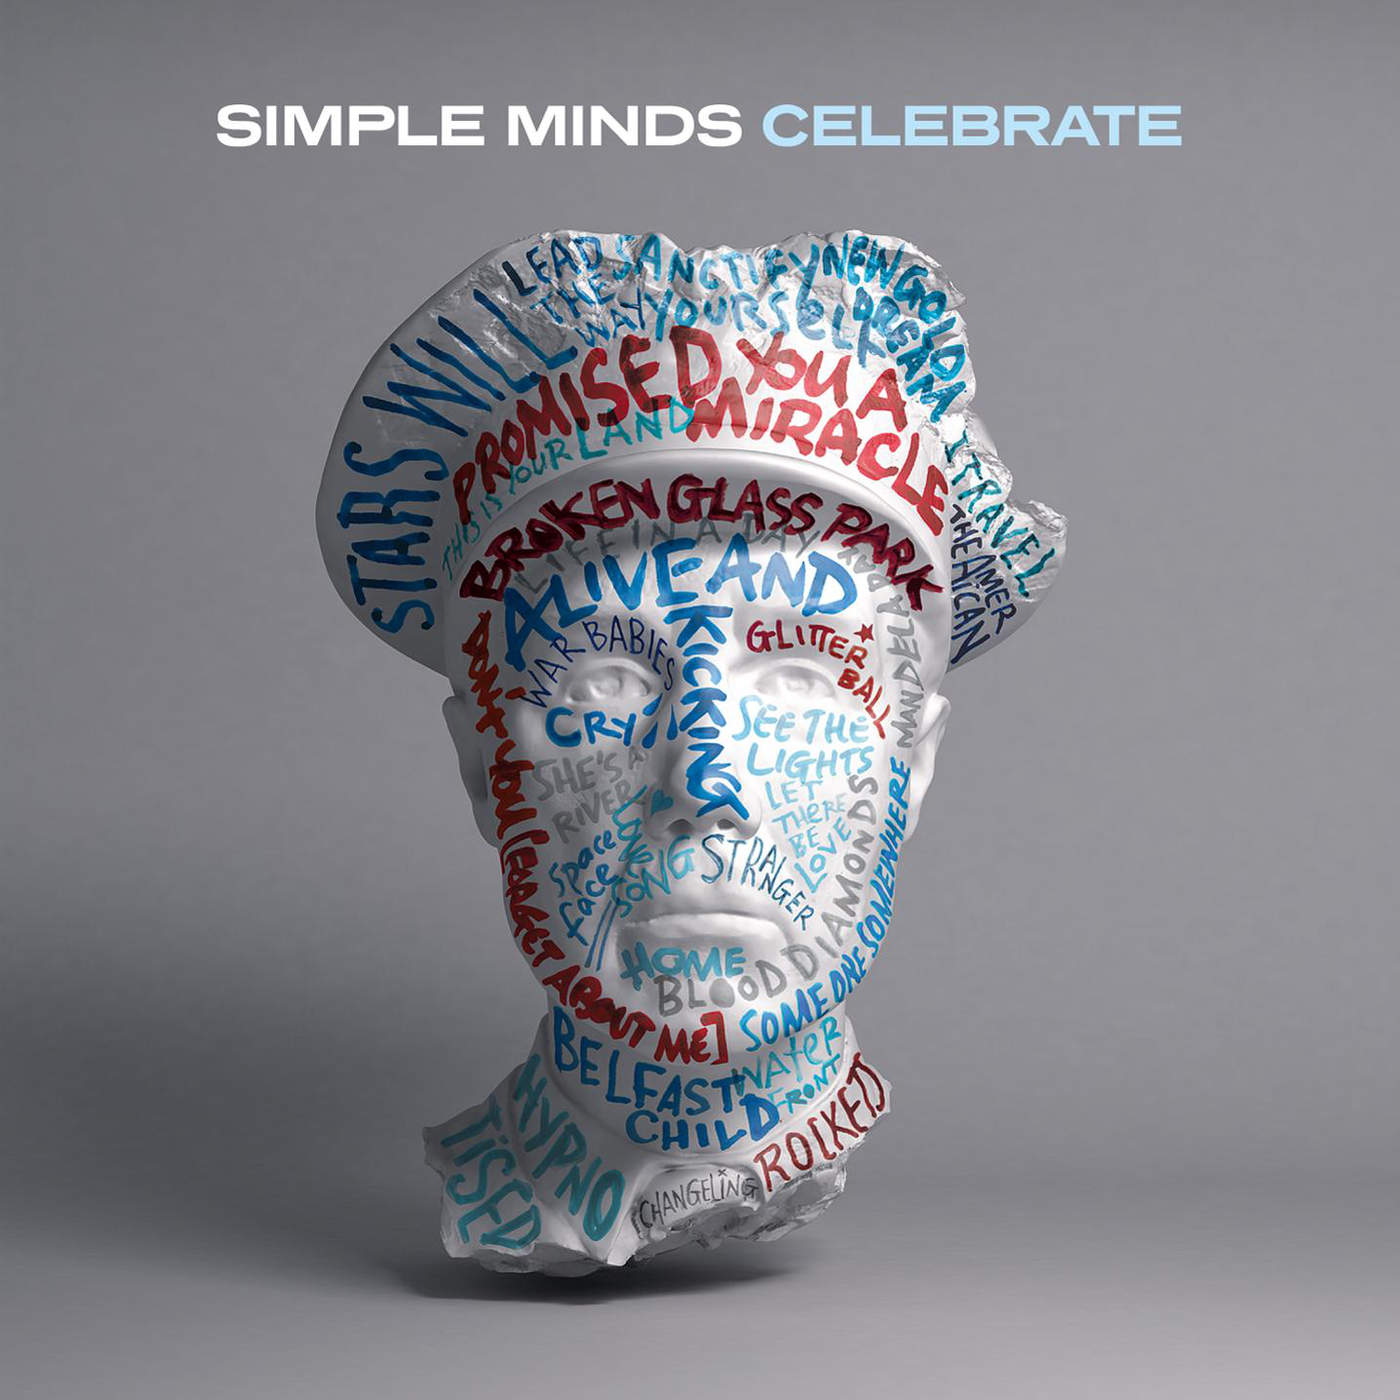 Art for Don't You (Forget About Me) by Simple Minds